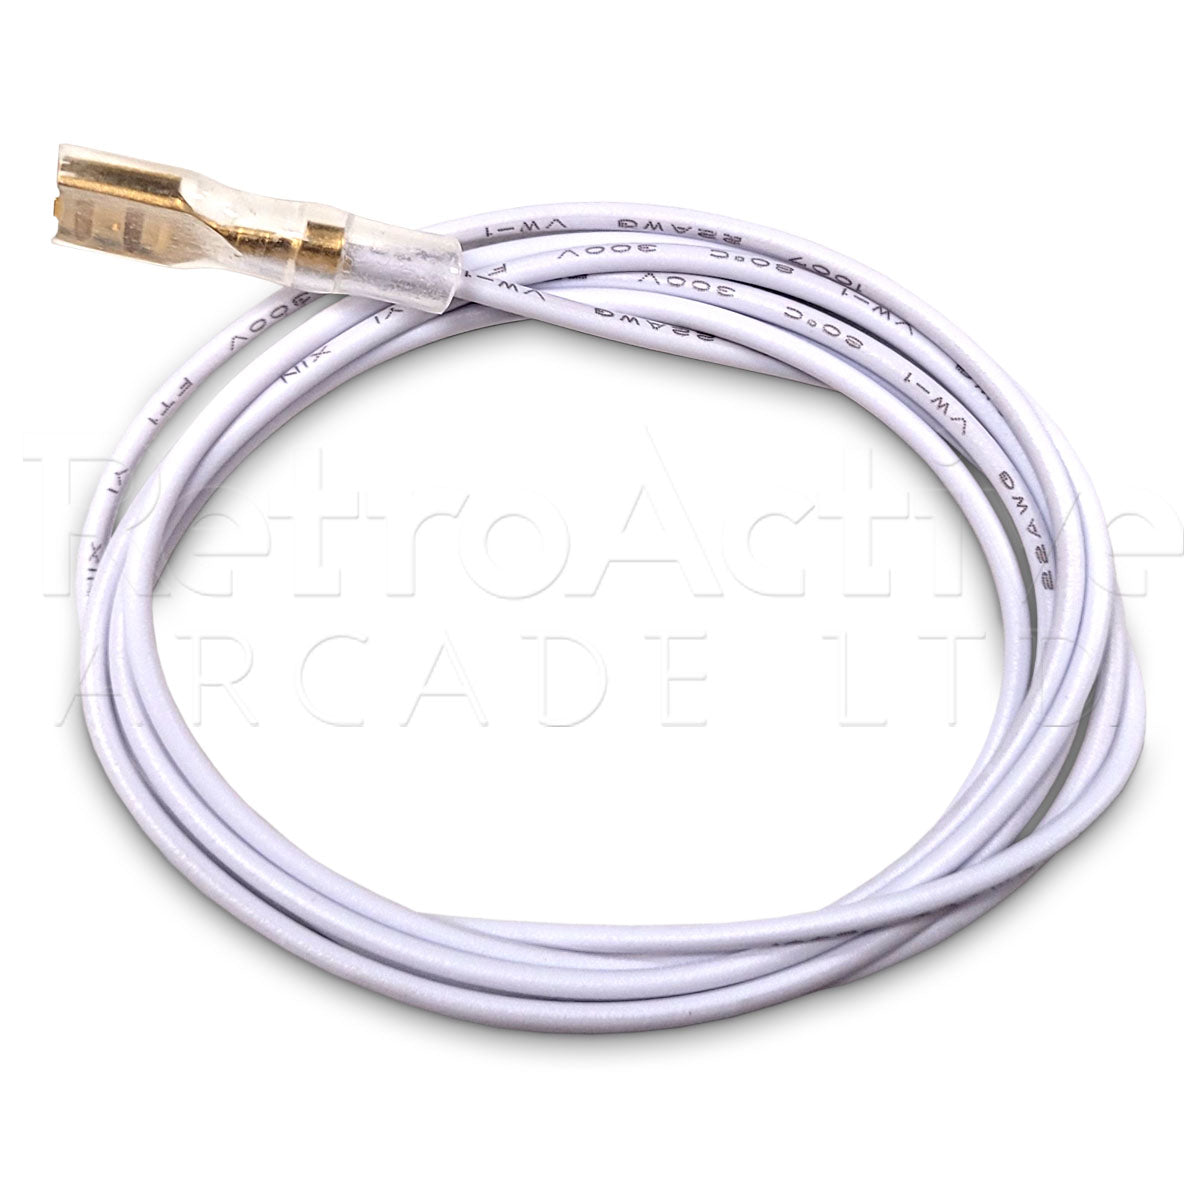 1 Meter Wire with .187" Connector - White Wiring & Harnesses Universal - Retro Active Arcade